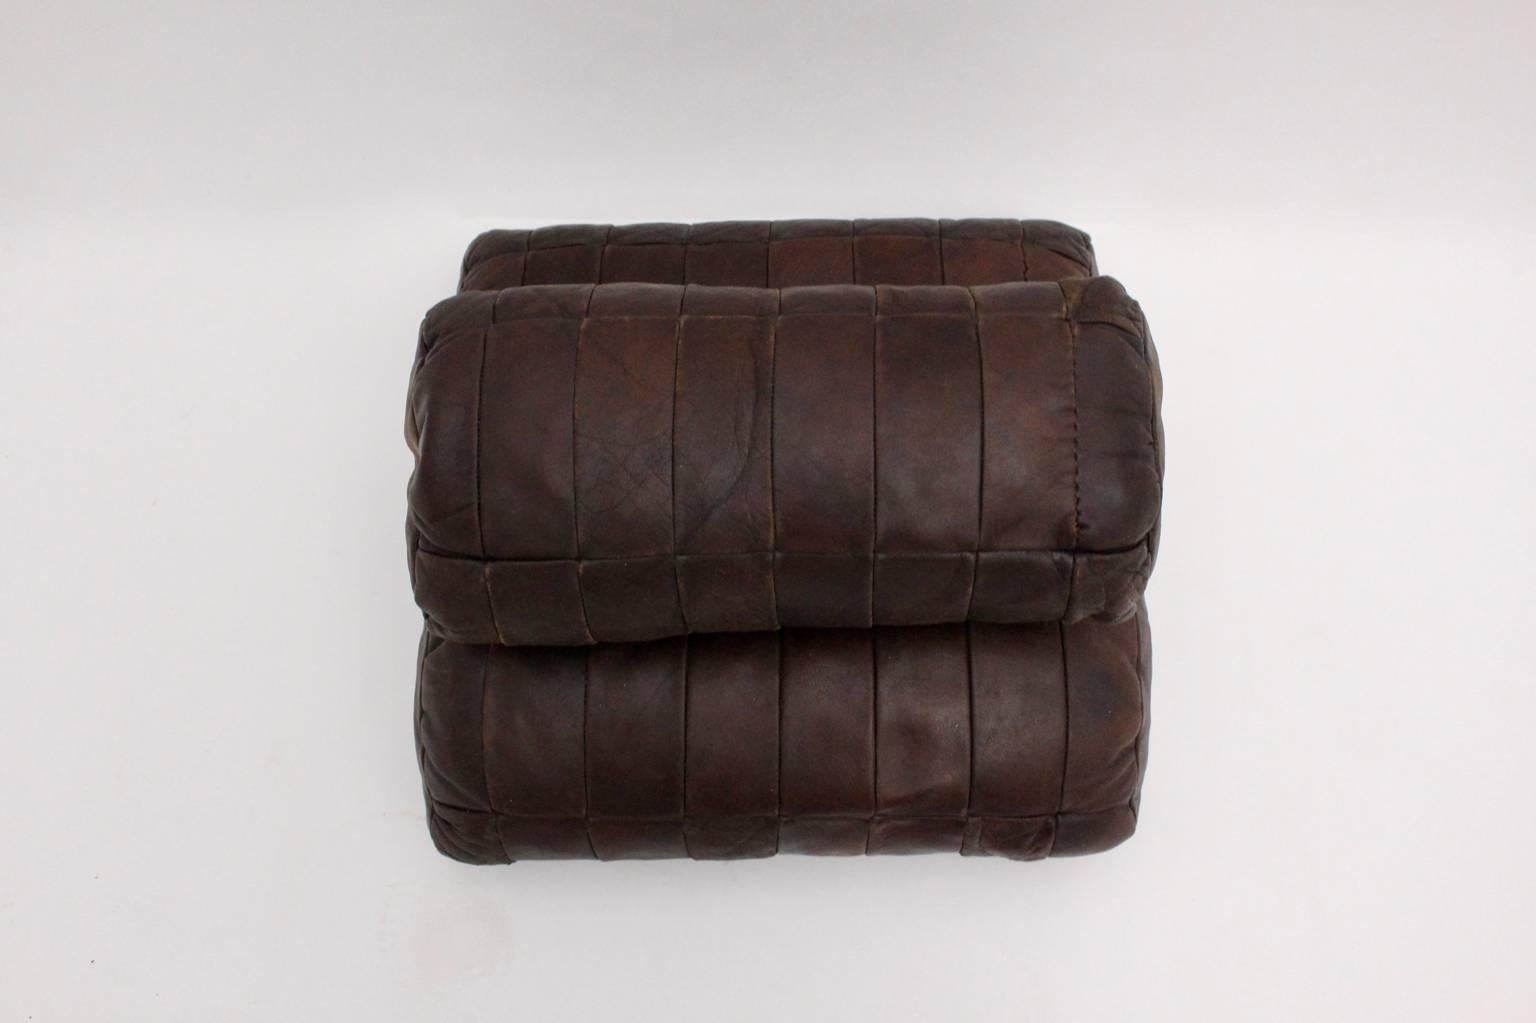 Swiss Brown Leather Pillows by De Sede, Switzerland, 1970s